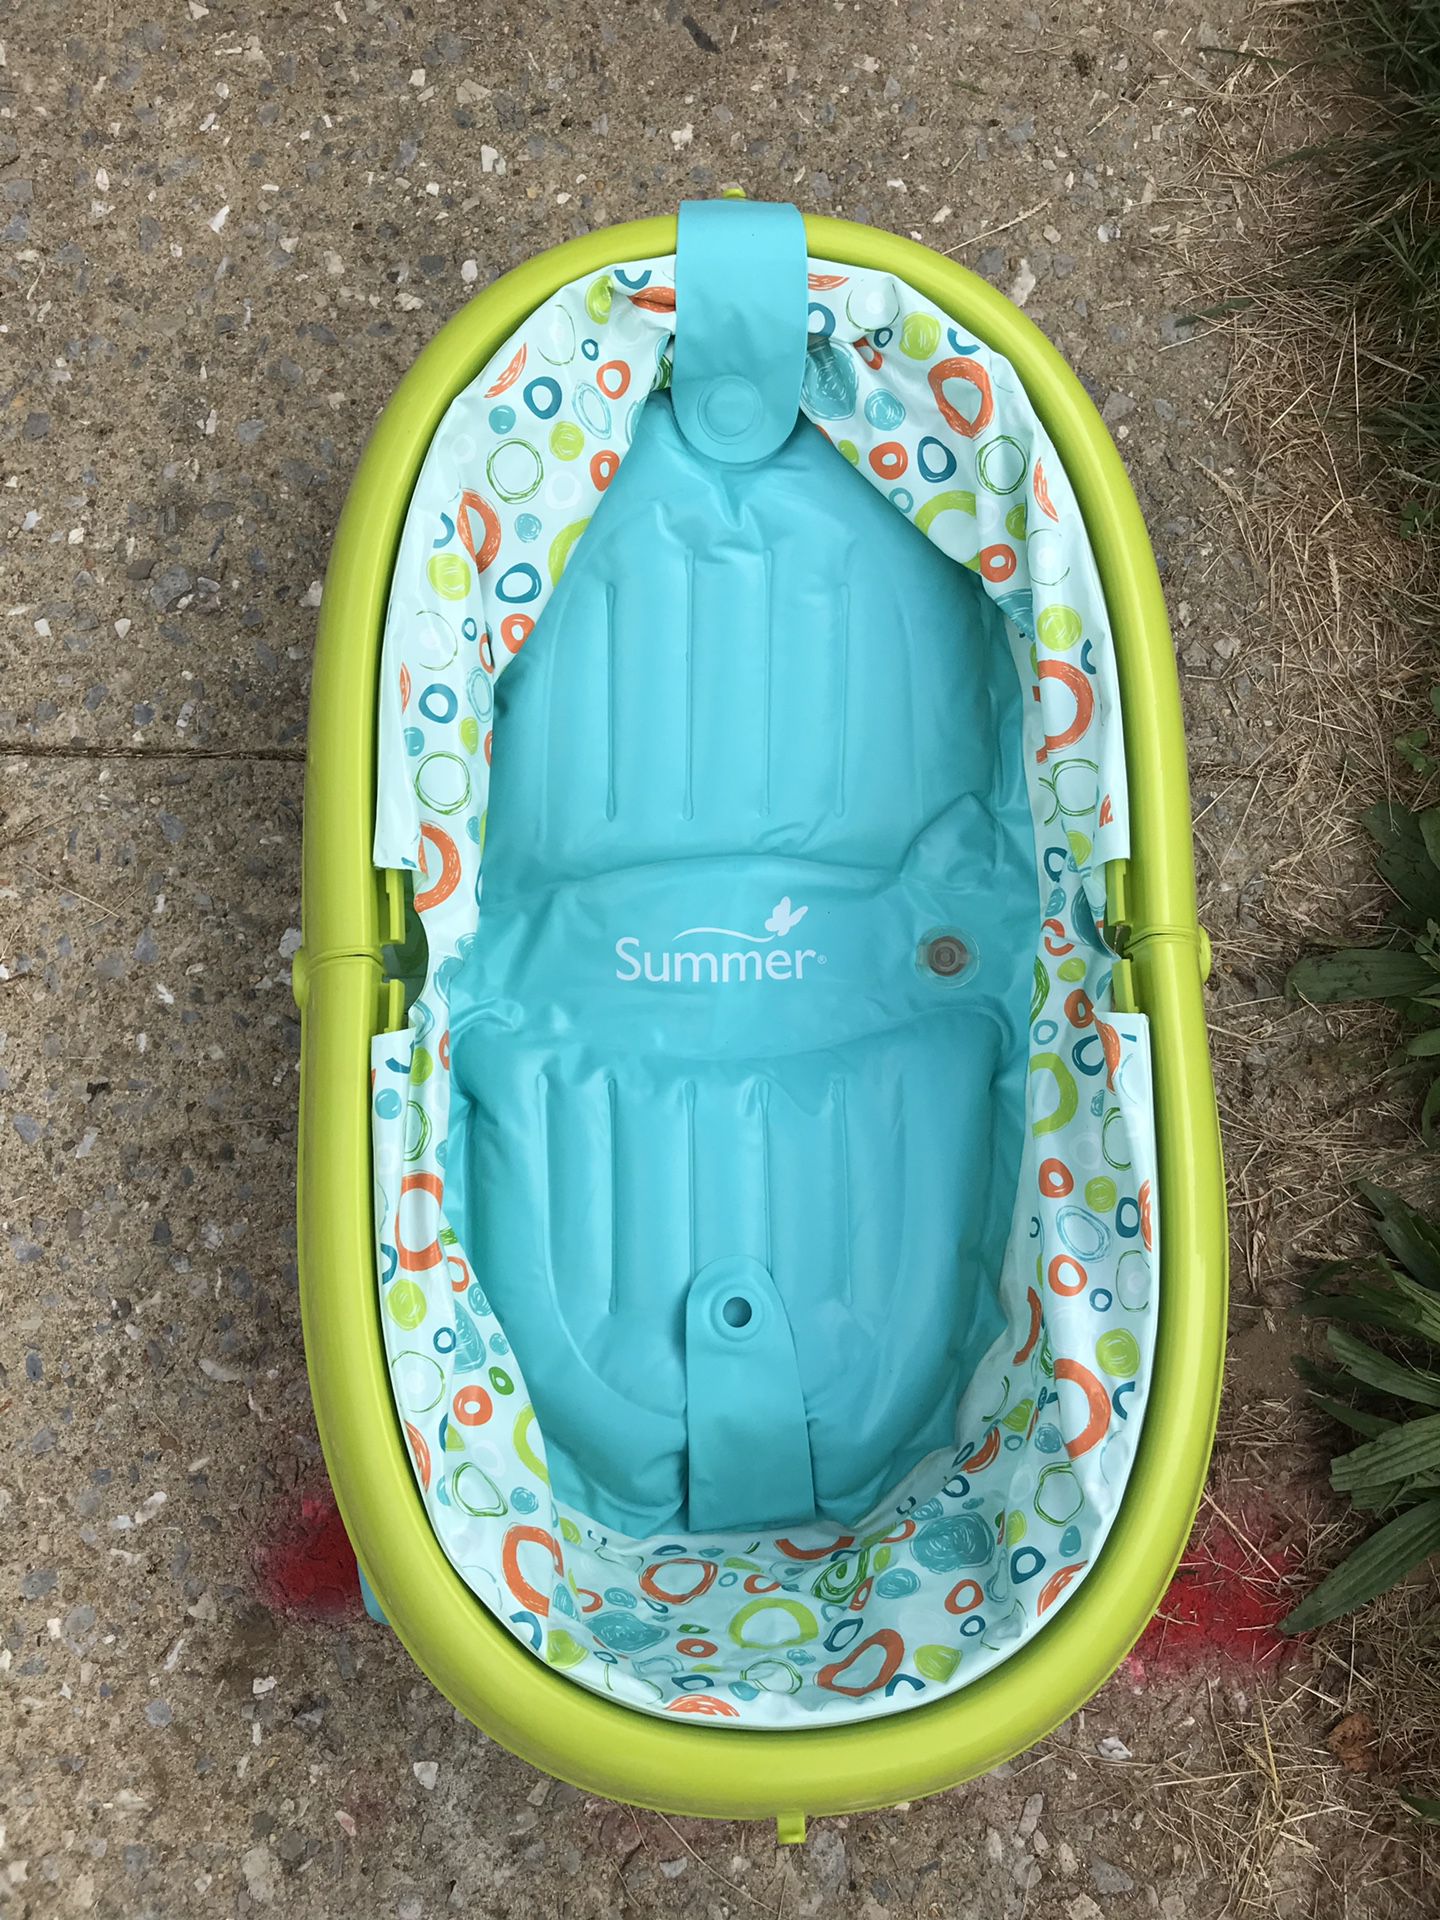 Baby bath tub and booster seat